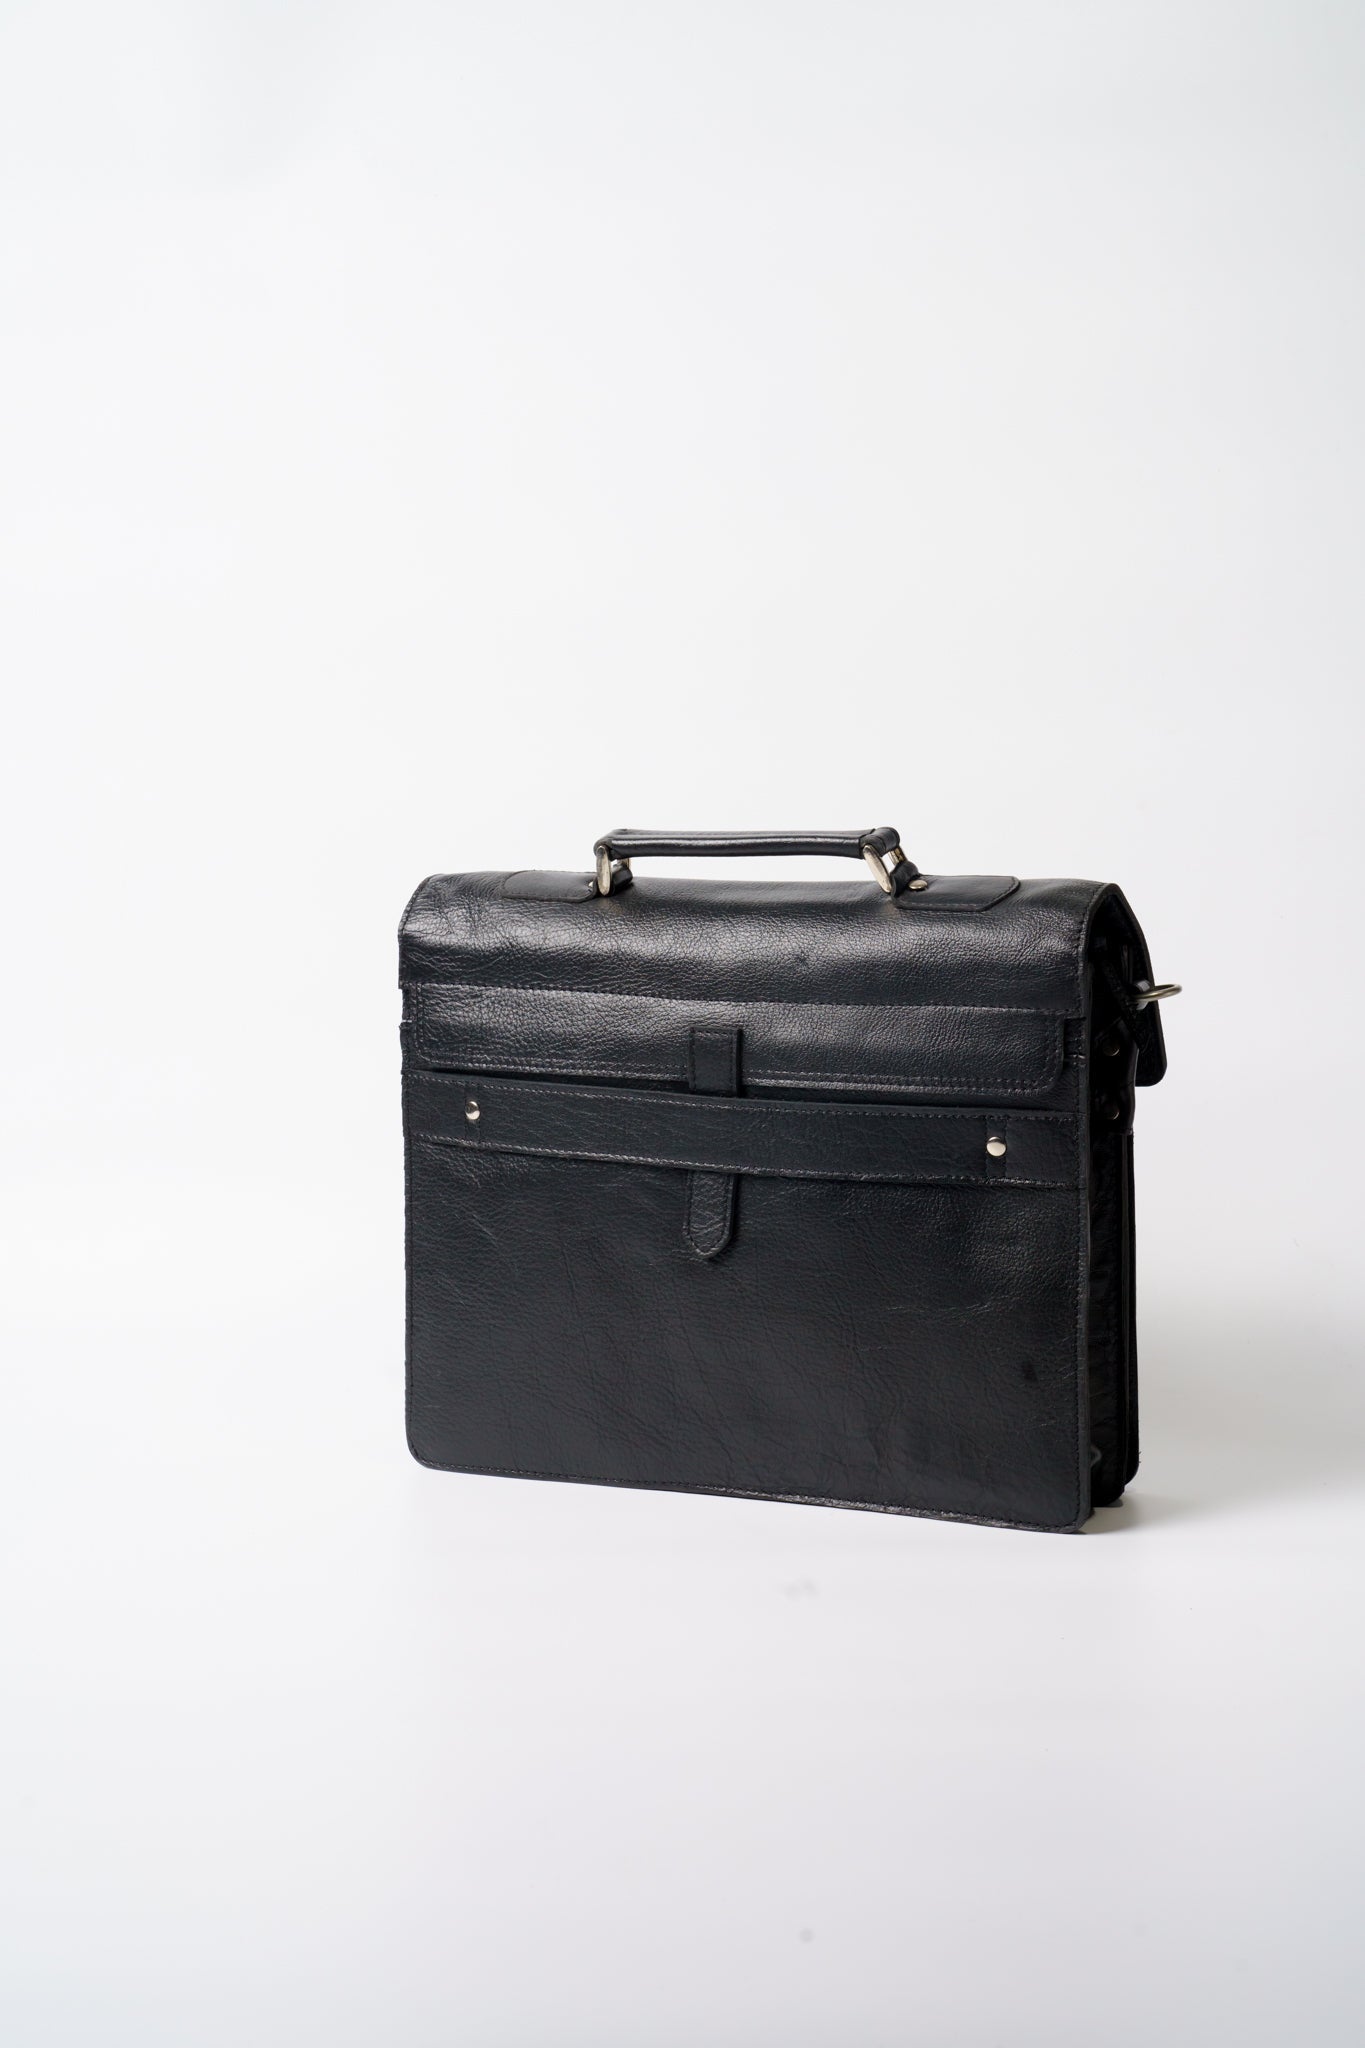 Front view of Chamra's black business laptop bag. Sleek small pockets can be seen, big enough to fit thin notebooks or documents.